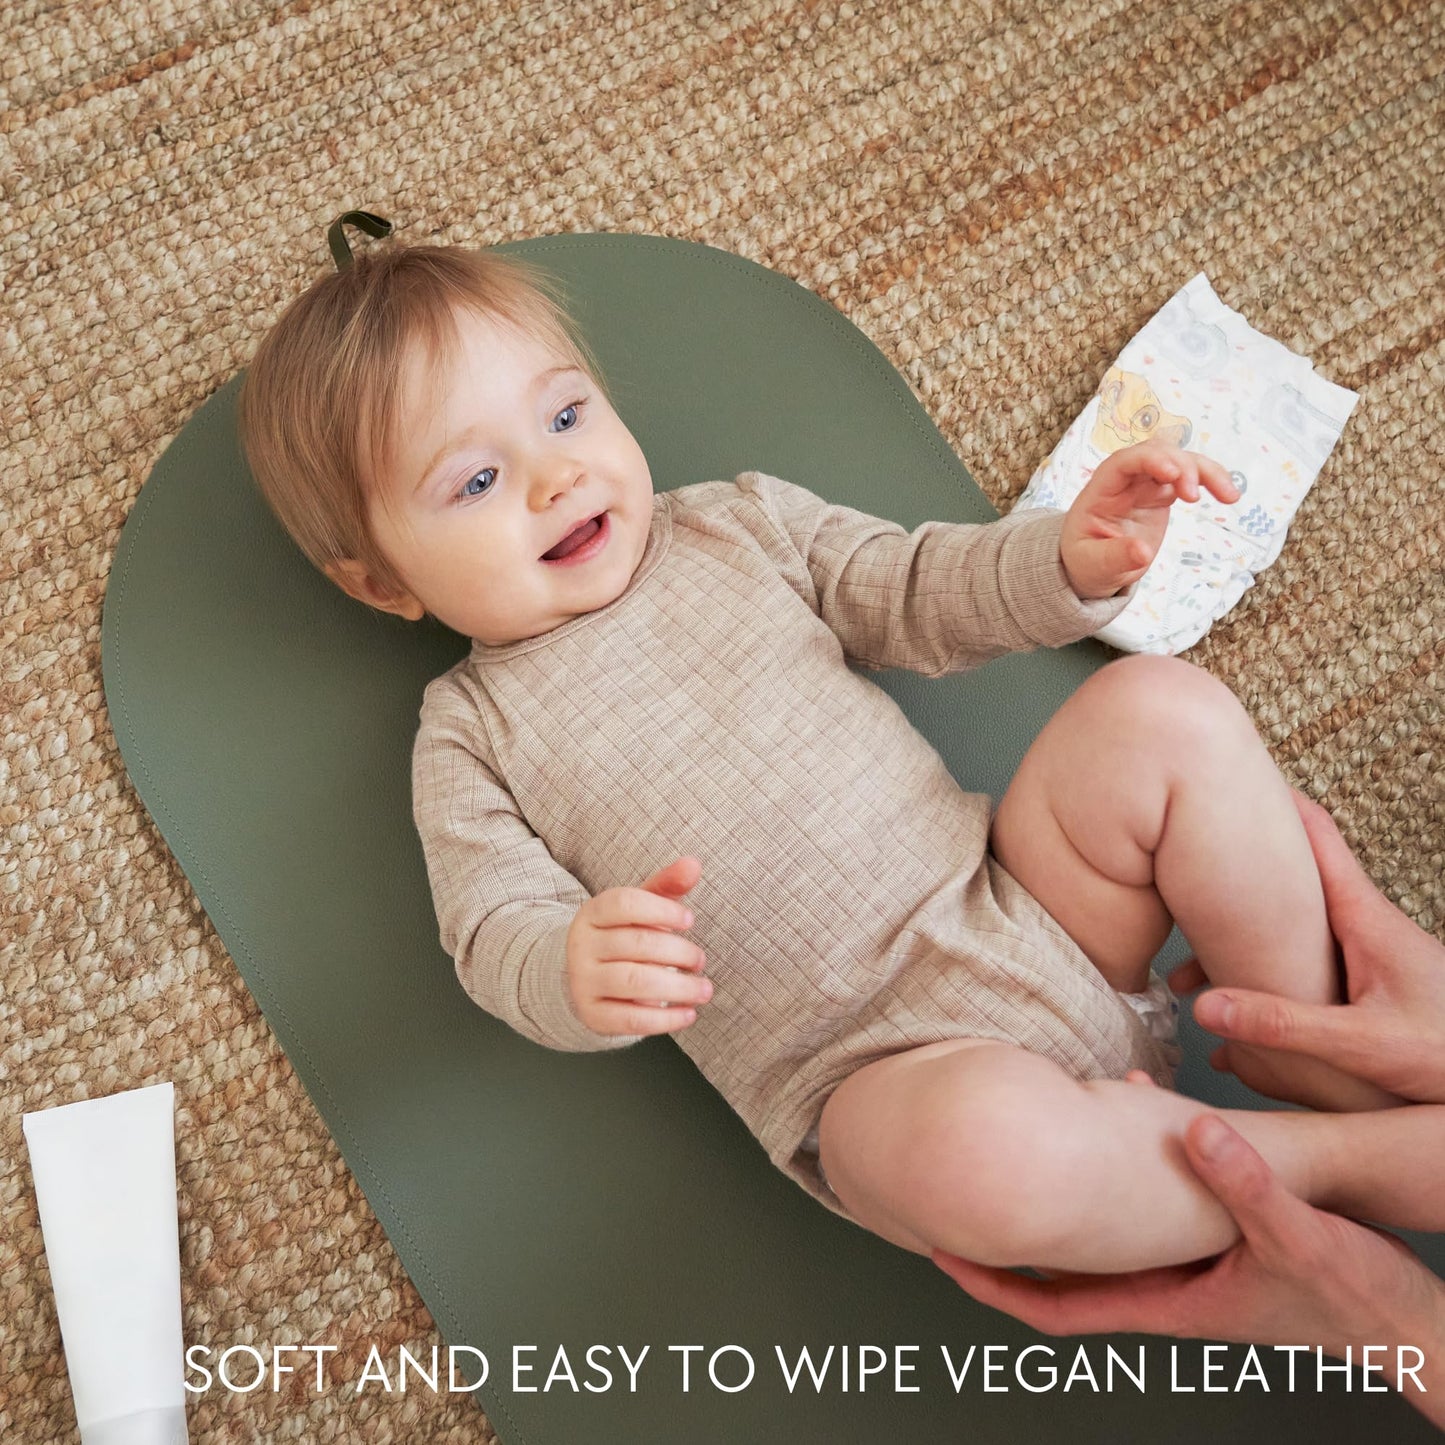 Portable Baby Diaper Changing Mat - Soft and Easy to Wipe Vegan Leather Changing Pad for Travel or at Home Use - Lightweight and Foldable Mat That Perfectly Fits Into Any Diaper Bag